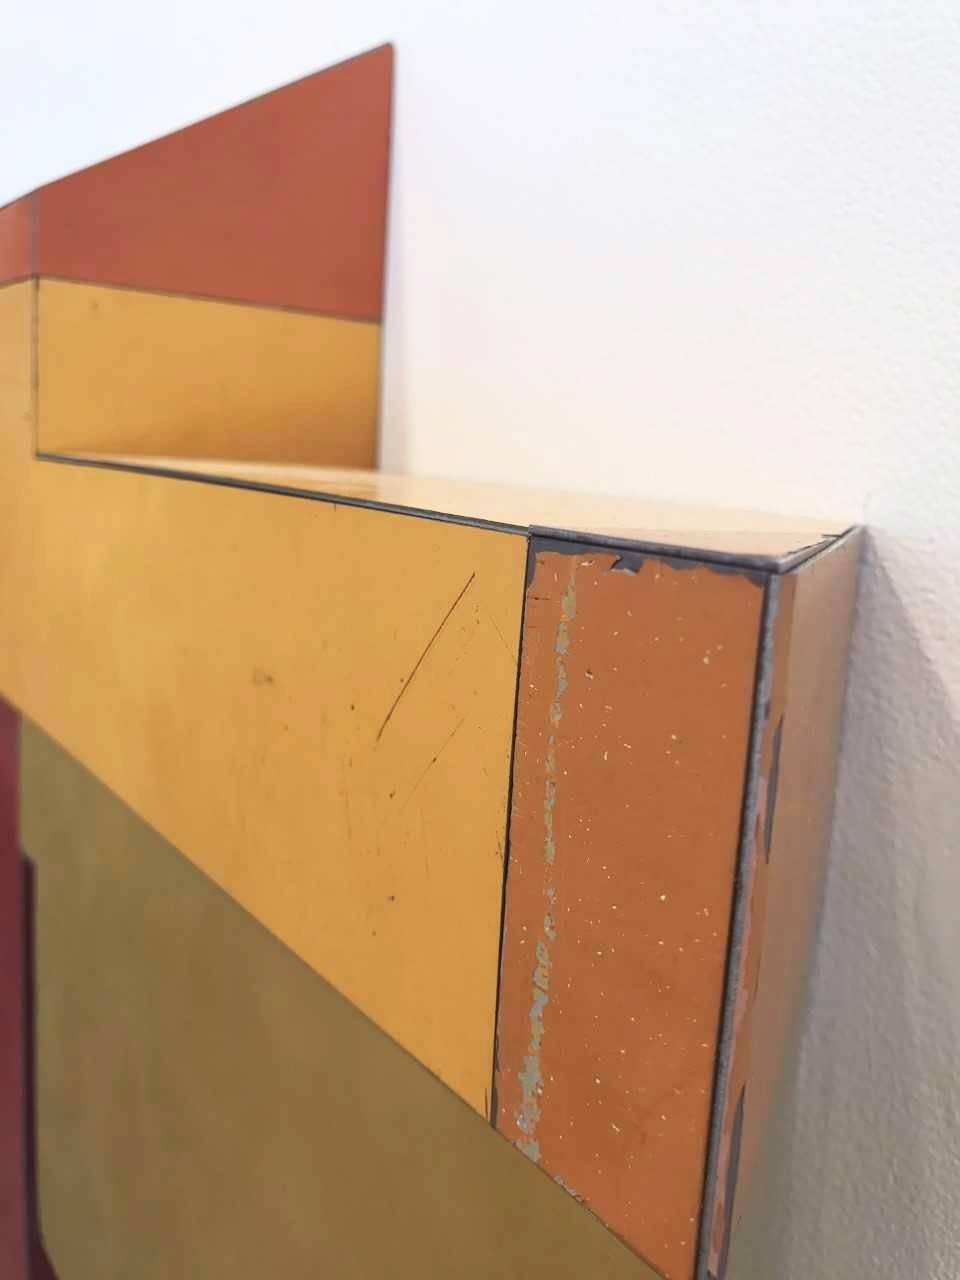 Ted Larsen's Random Logic is a hard-edged sculptural, mixed media painting. The work is primarily red, yellow, and orange in color. It is a graphic, architectural, minimalist three-dimensional painting. Constructivist, Bauhaus, abstract geometric,